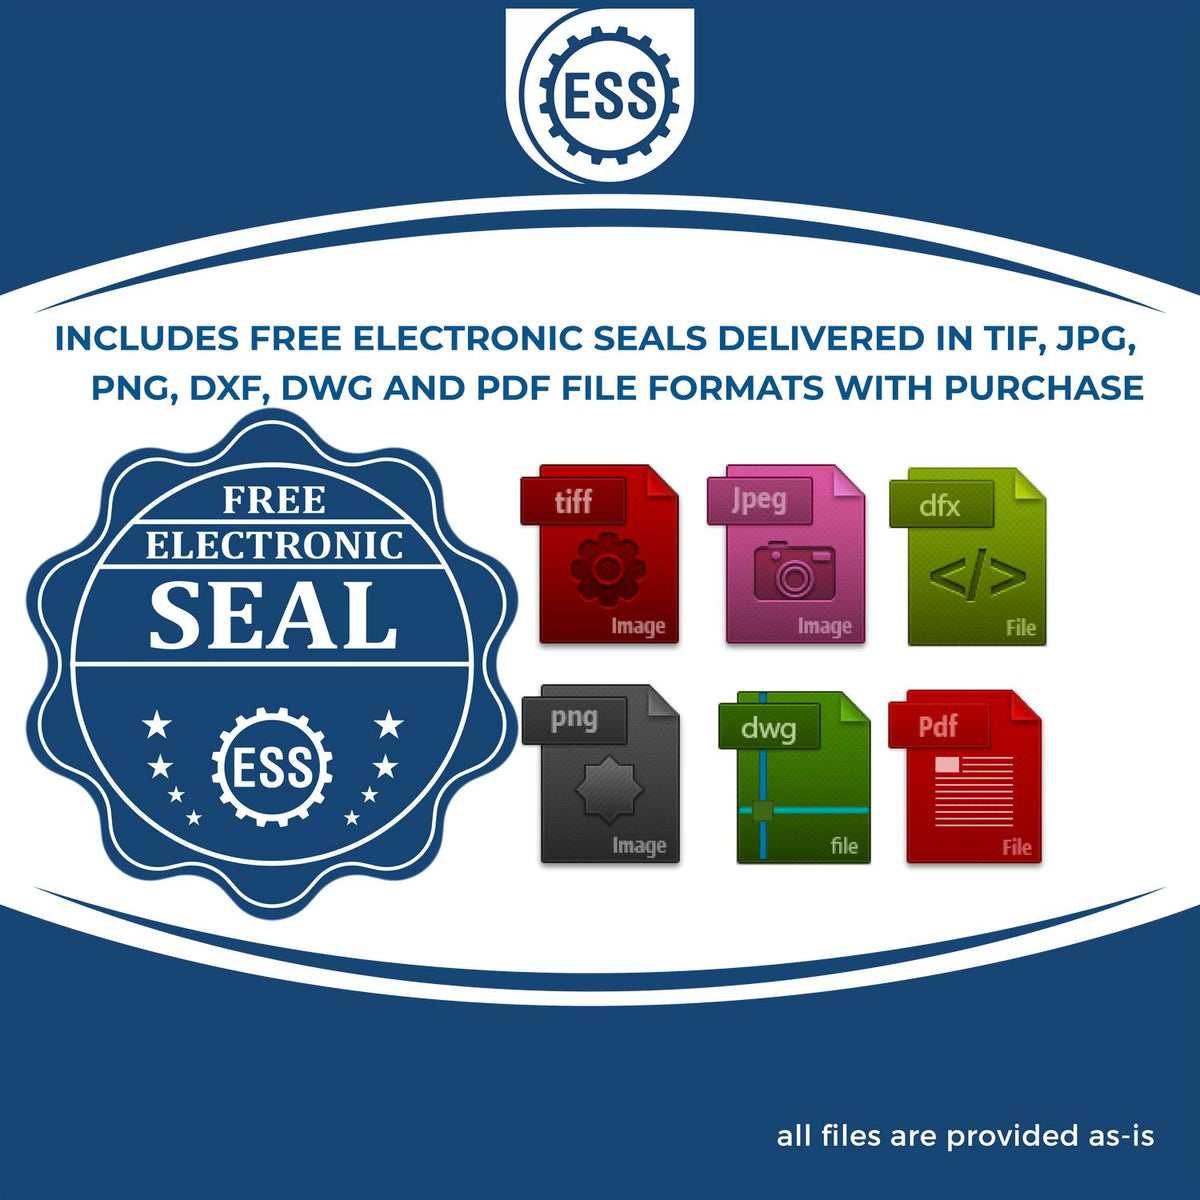 An infographic for the free electronic seal for the PSI Wisconsin Notary Stamp illustrating the different file type icons such as DXF, DWG, TIF, JPG and PNG.